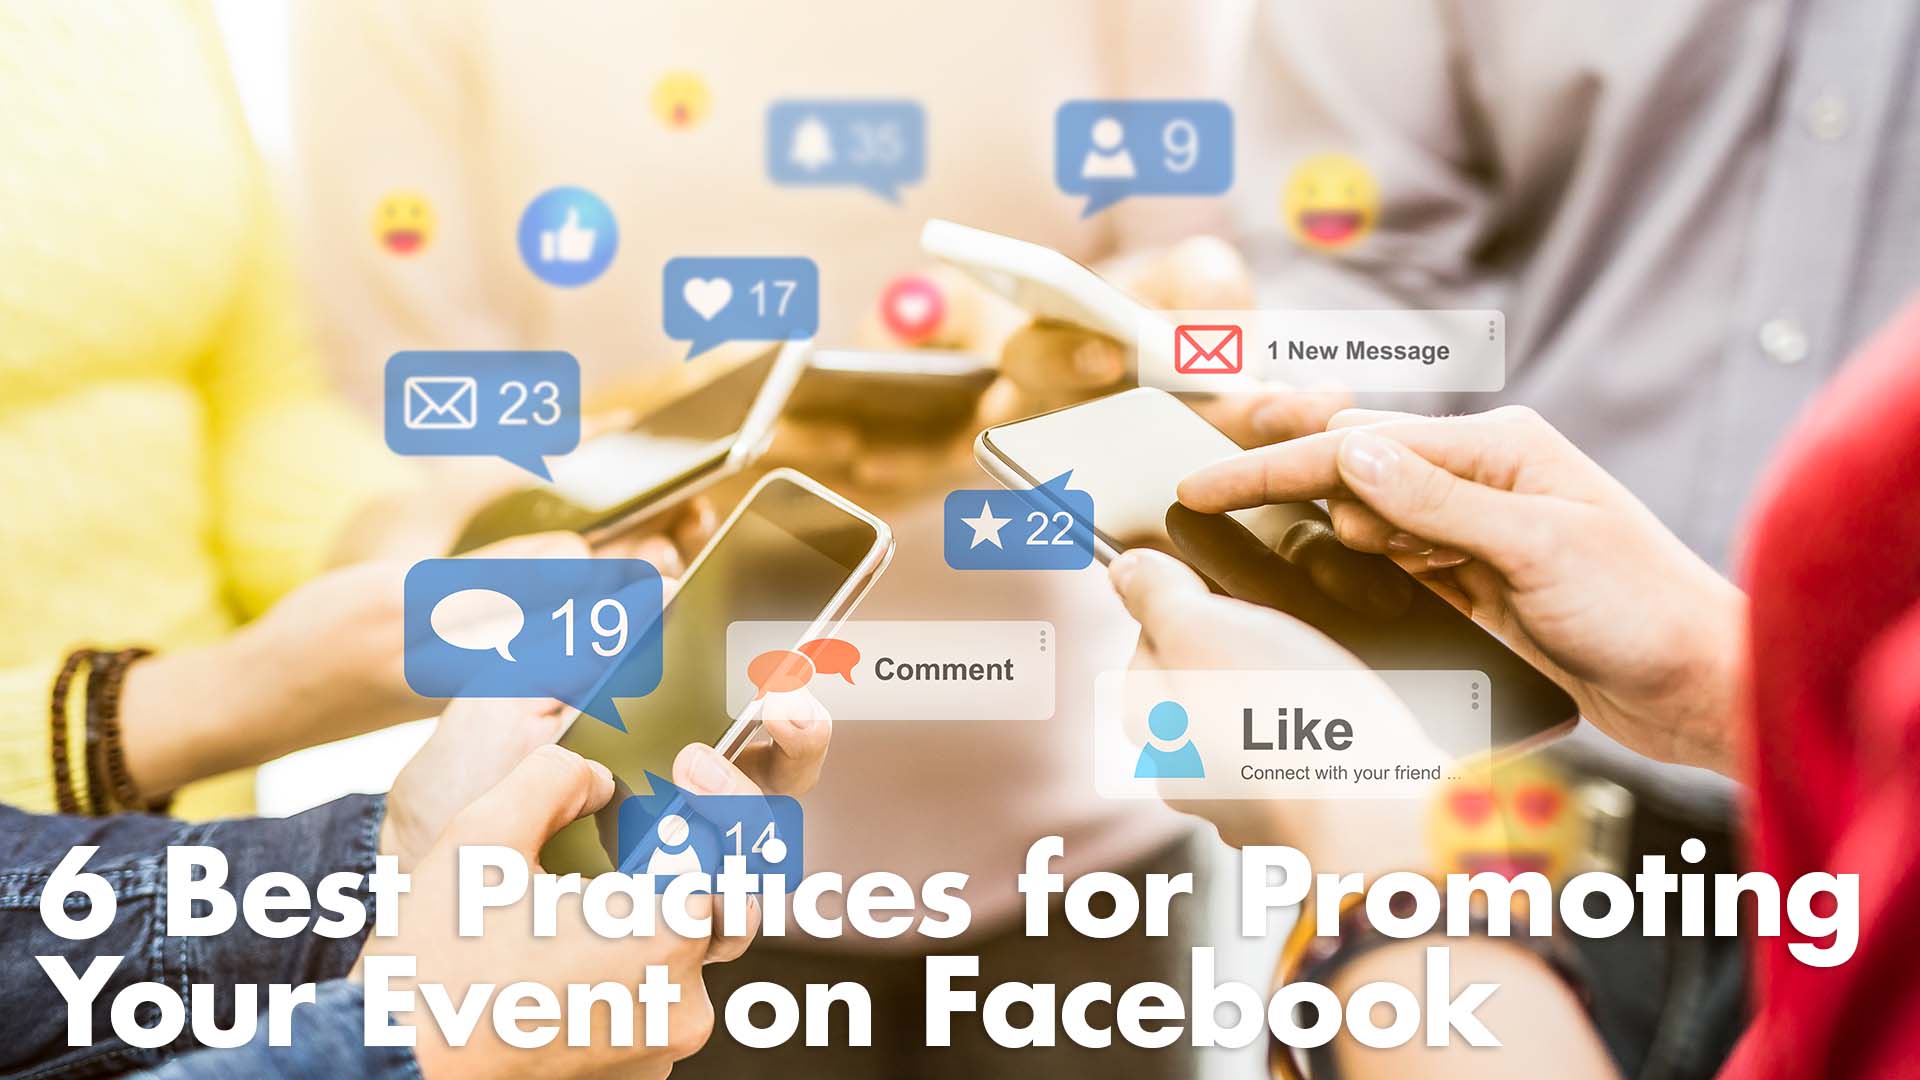 Best practices for engaging with attendees before during and after the event on Facebook Full HD